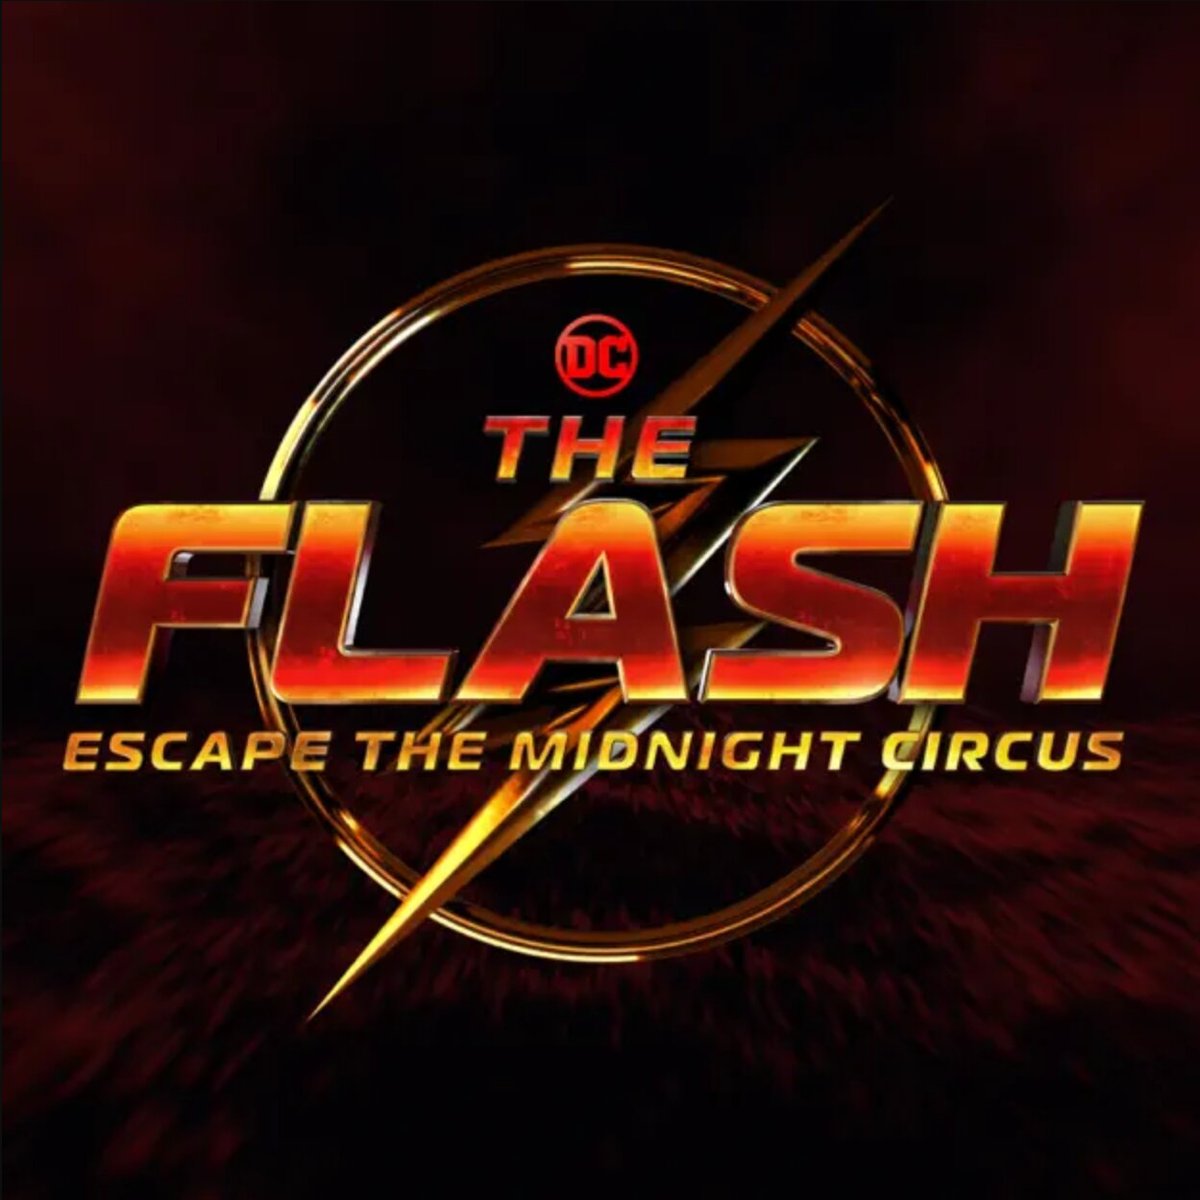 The Flash: Escape the Midnight Circus art. Lettering rendered in gradient of red to yellow with the Flash symbol.